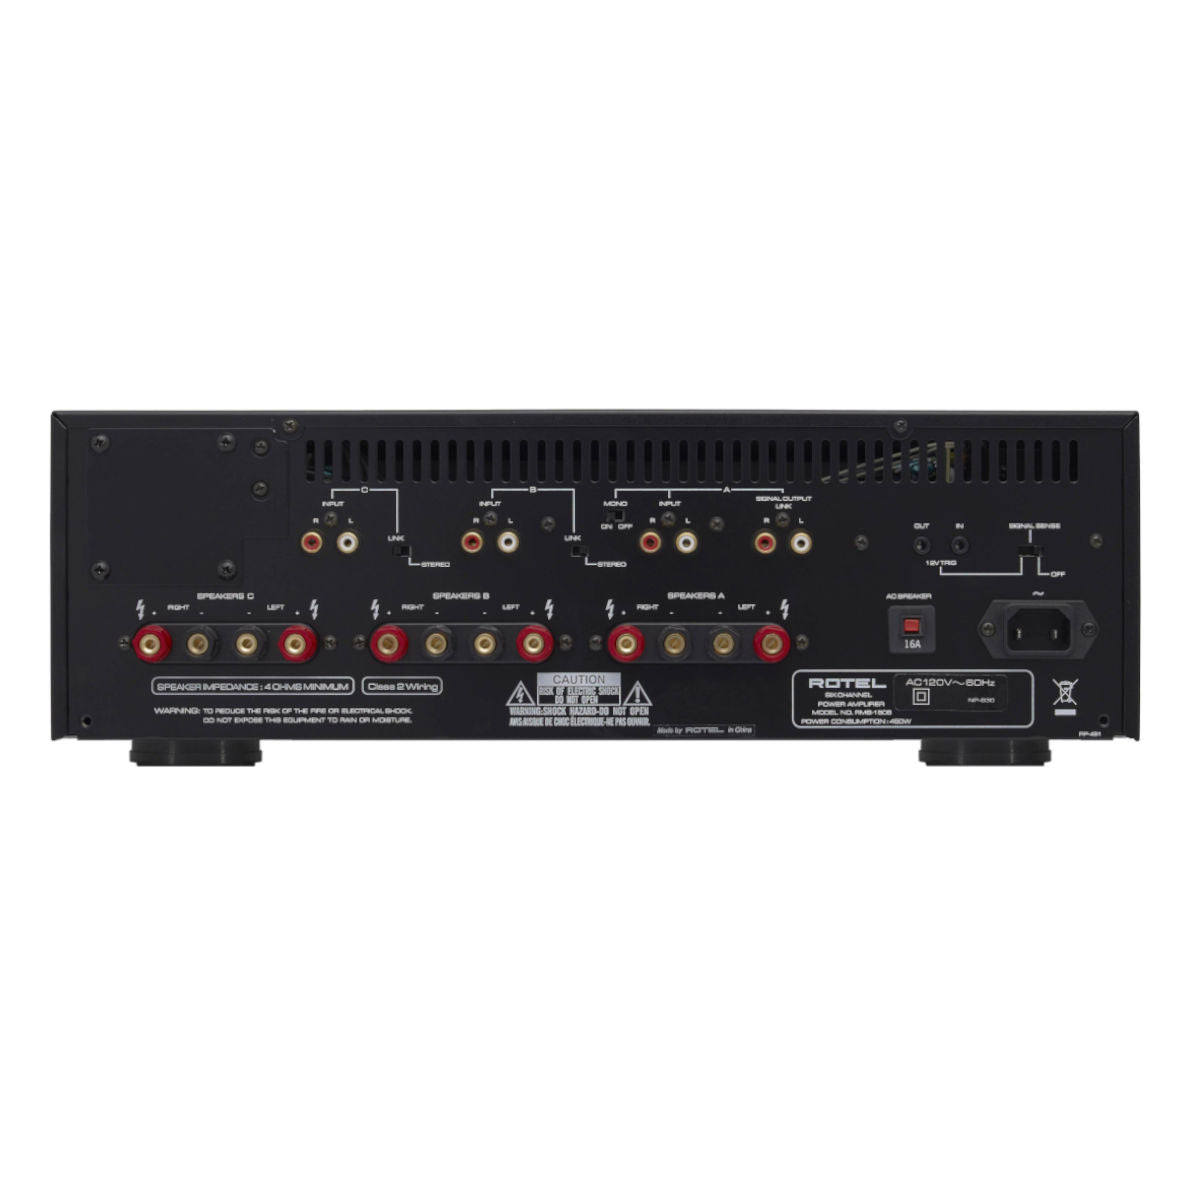 Rotel RMB-1506 6-channel Distribution Amplifier - Rear View